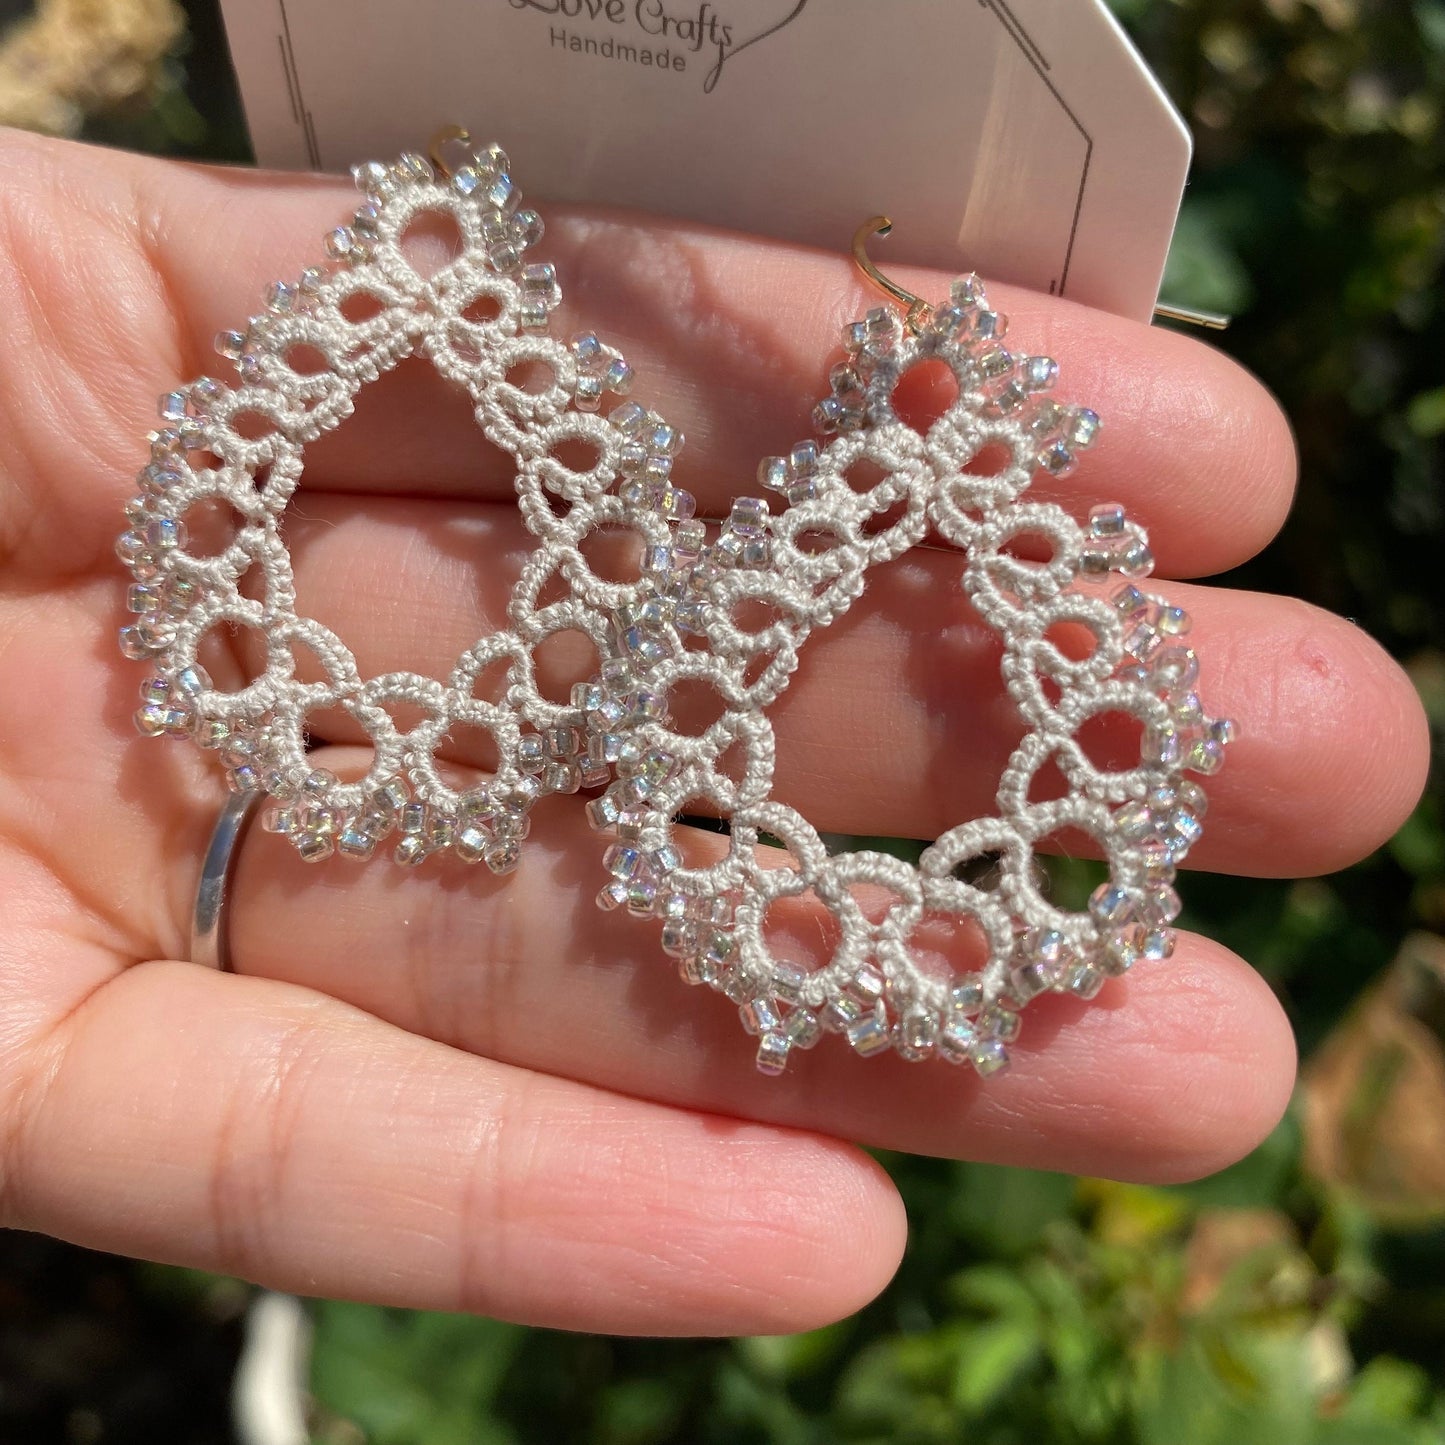 Gray lace beaded Wedding Tatting earrings/Lace tat/Crochet doily like technique/Handmade jewelry/eco friendly/Gift for her/Ship from US